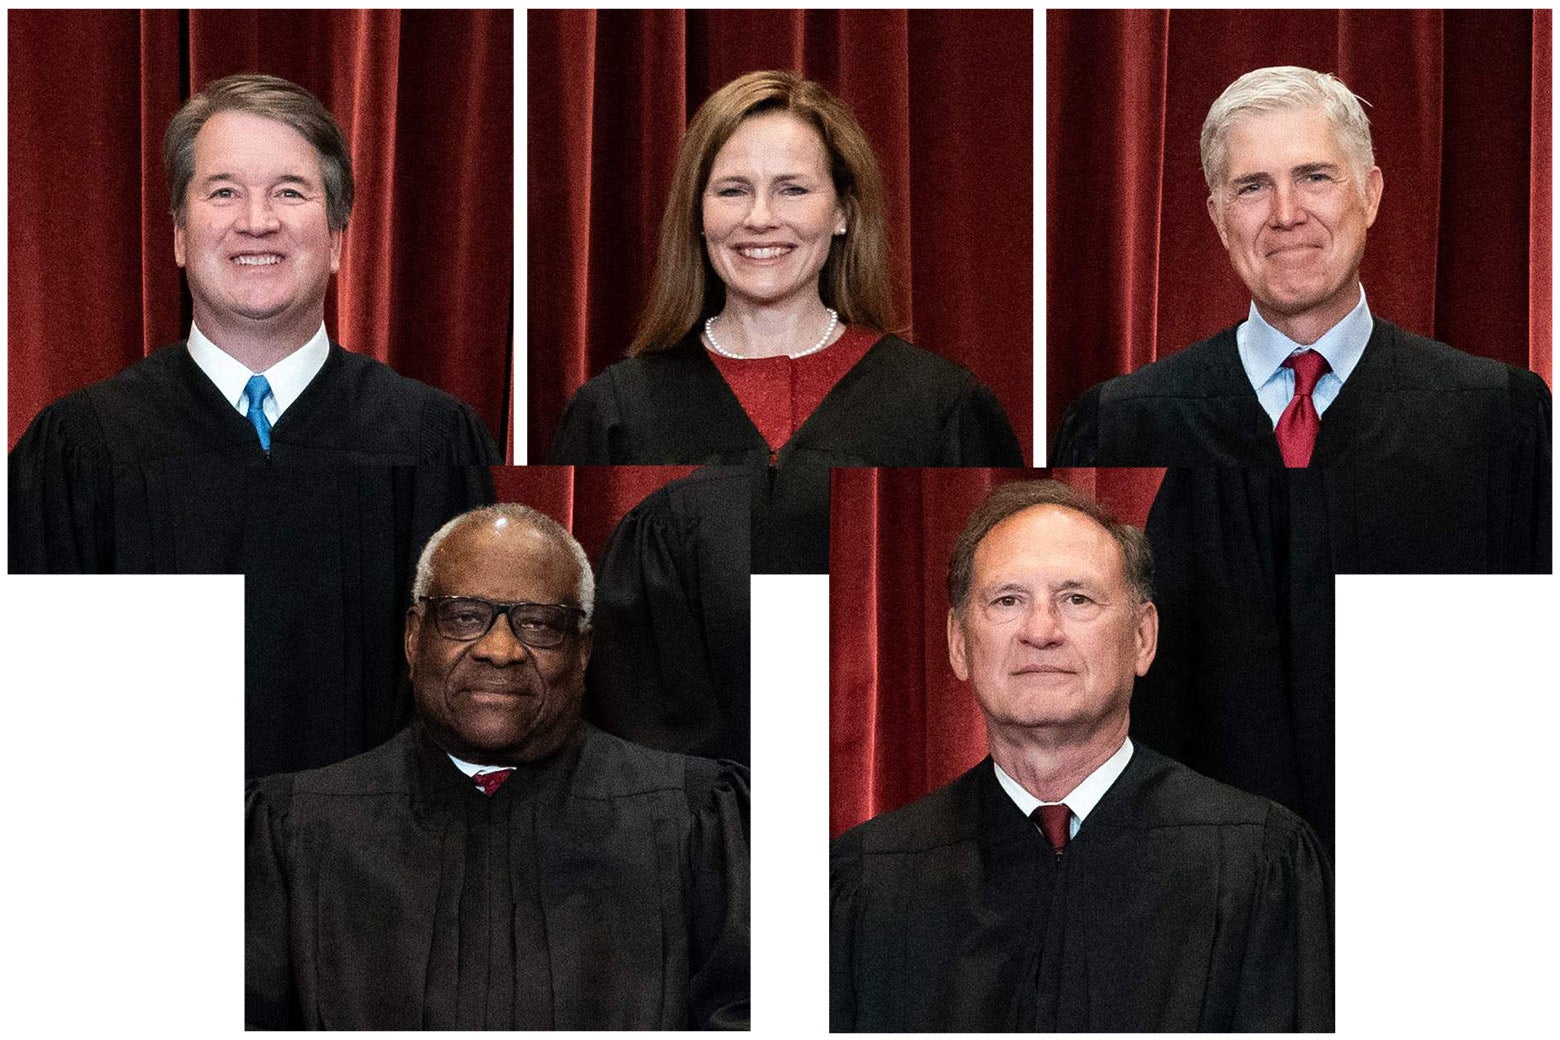 Photos of the five conservative justices